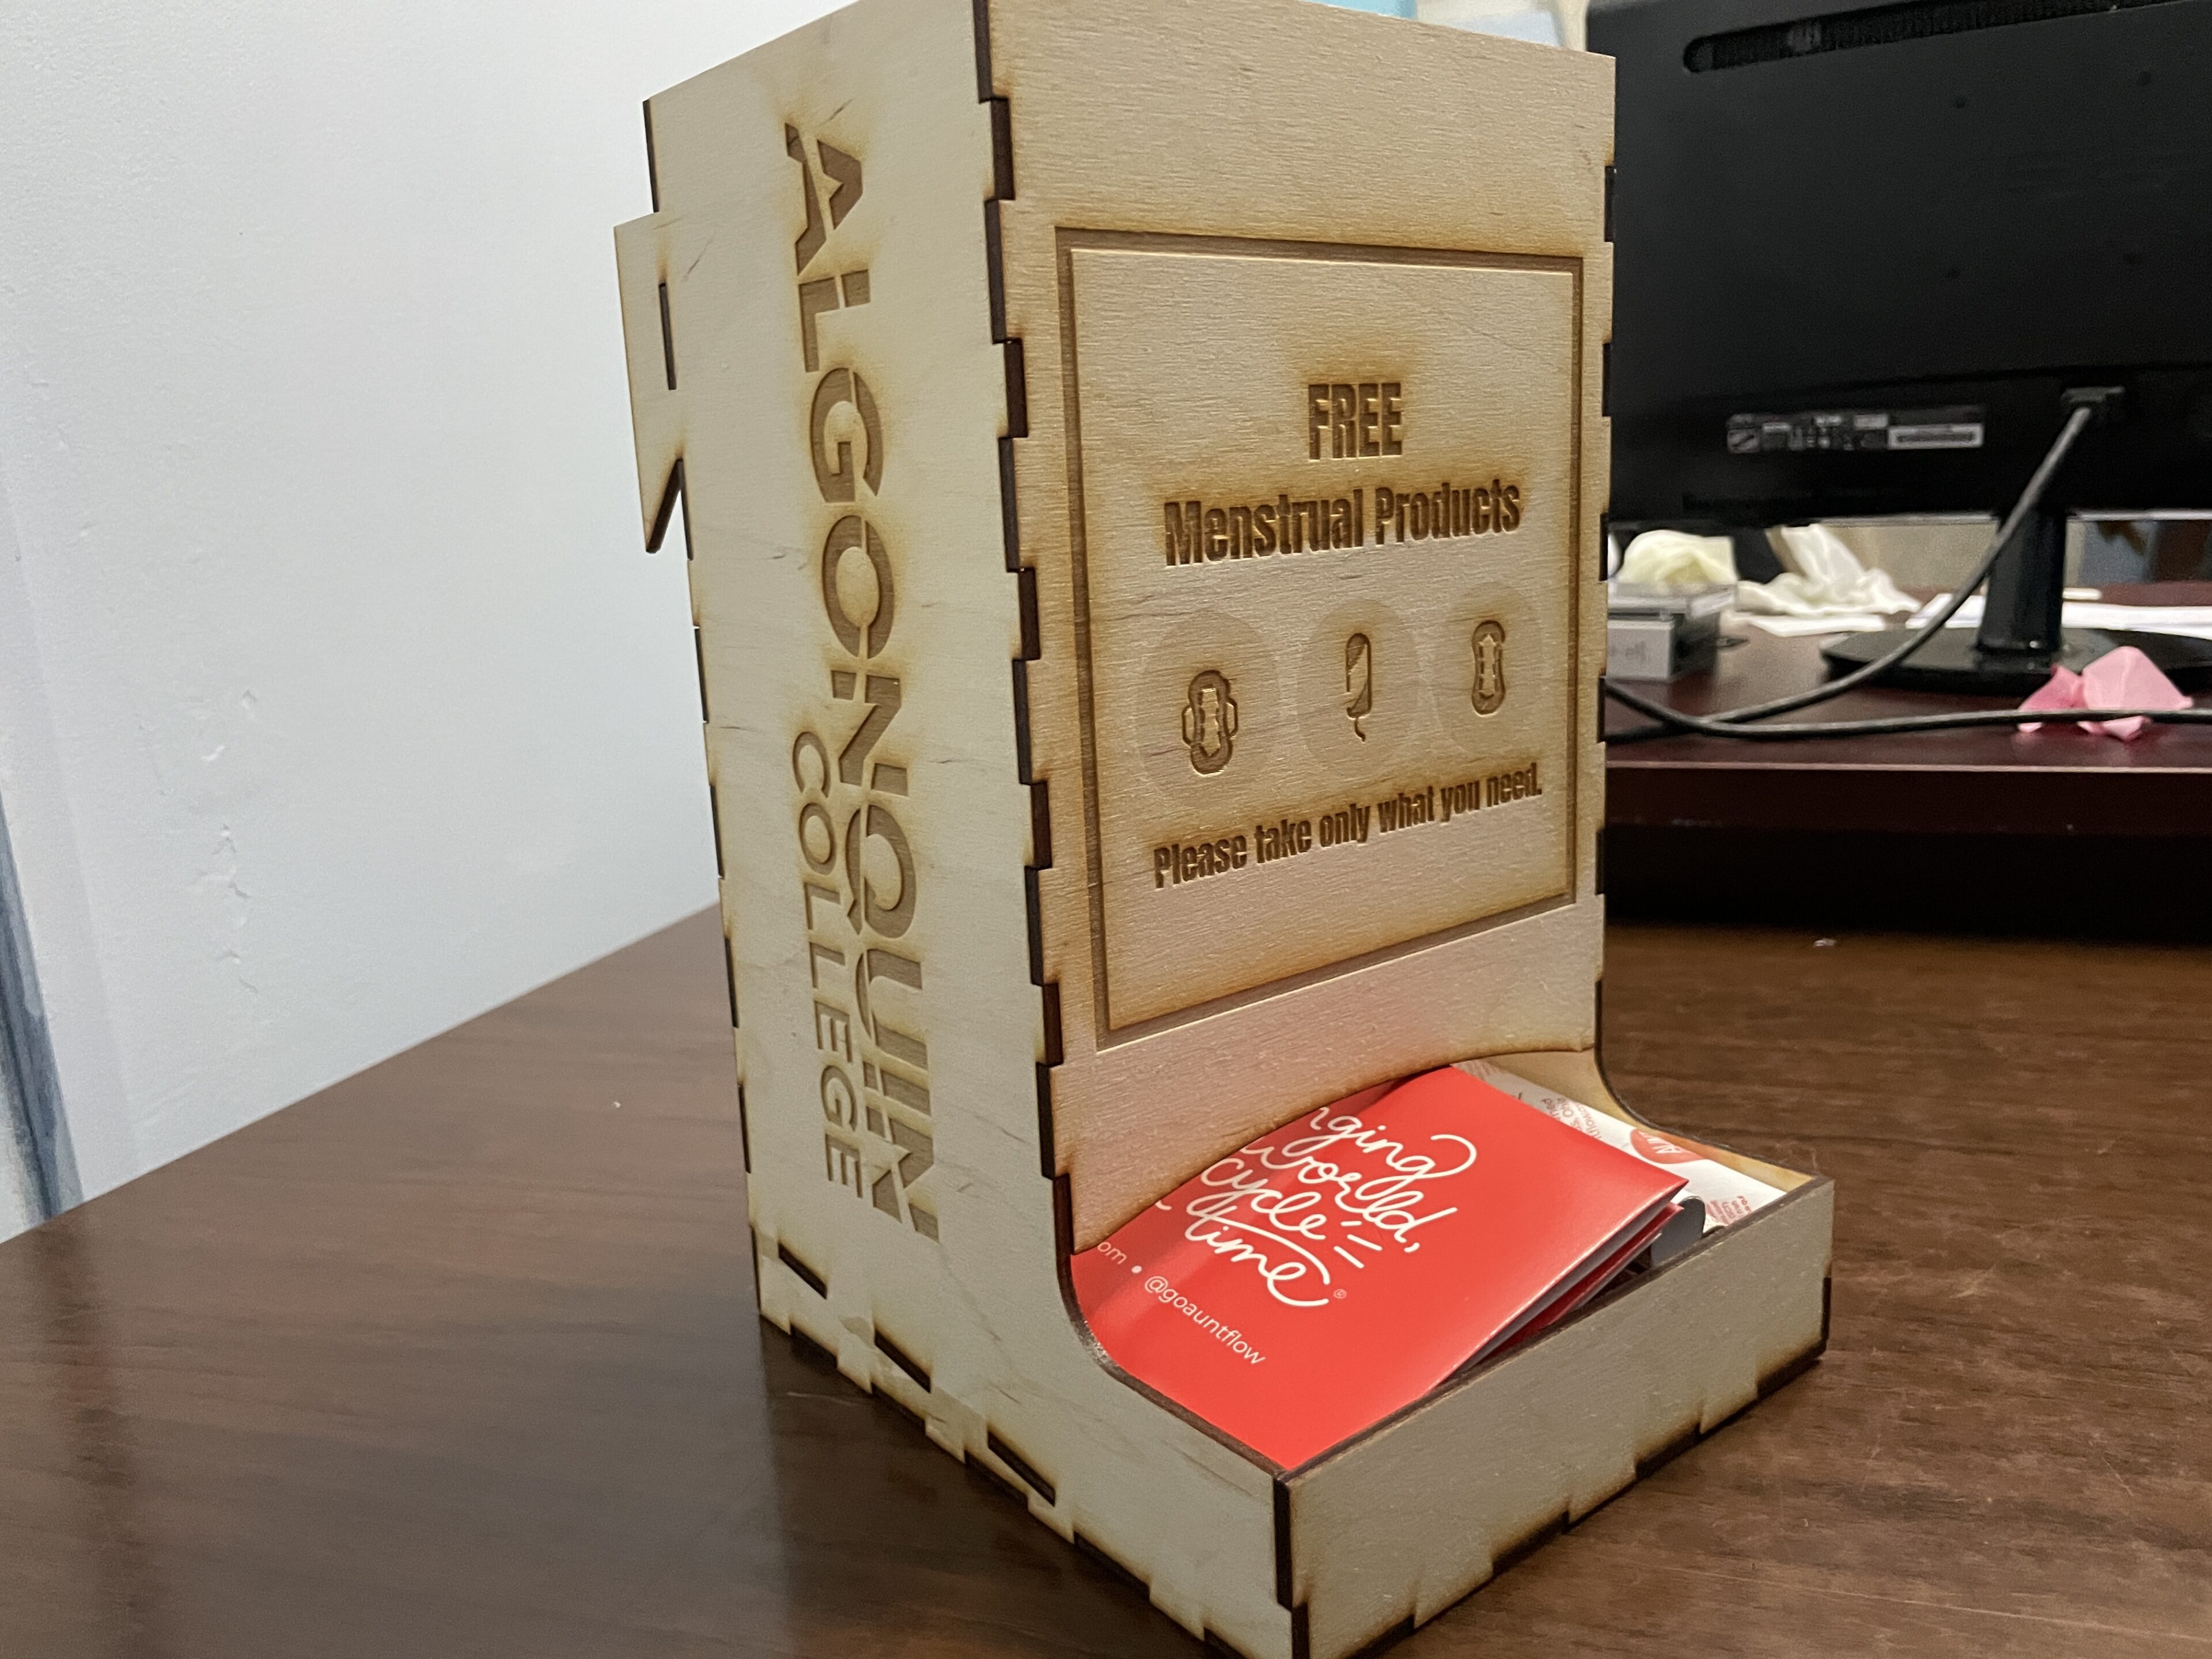 A wooden box with a red menstrual hygiene product box in it